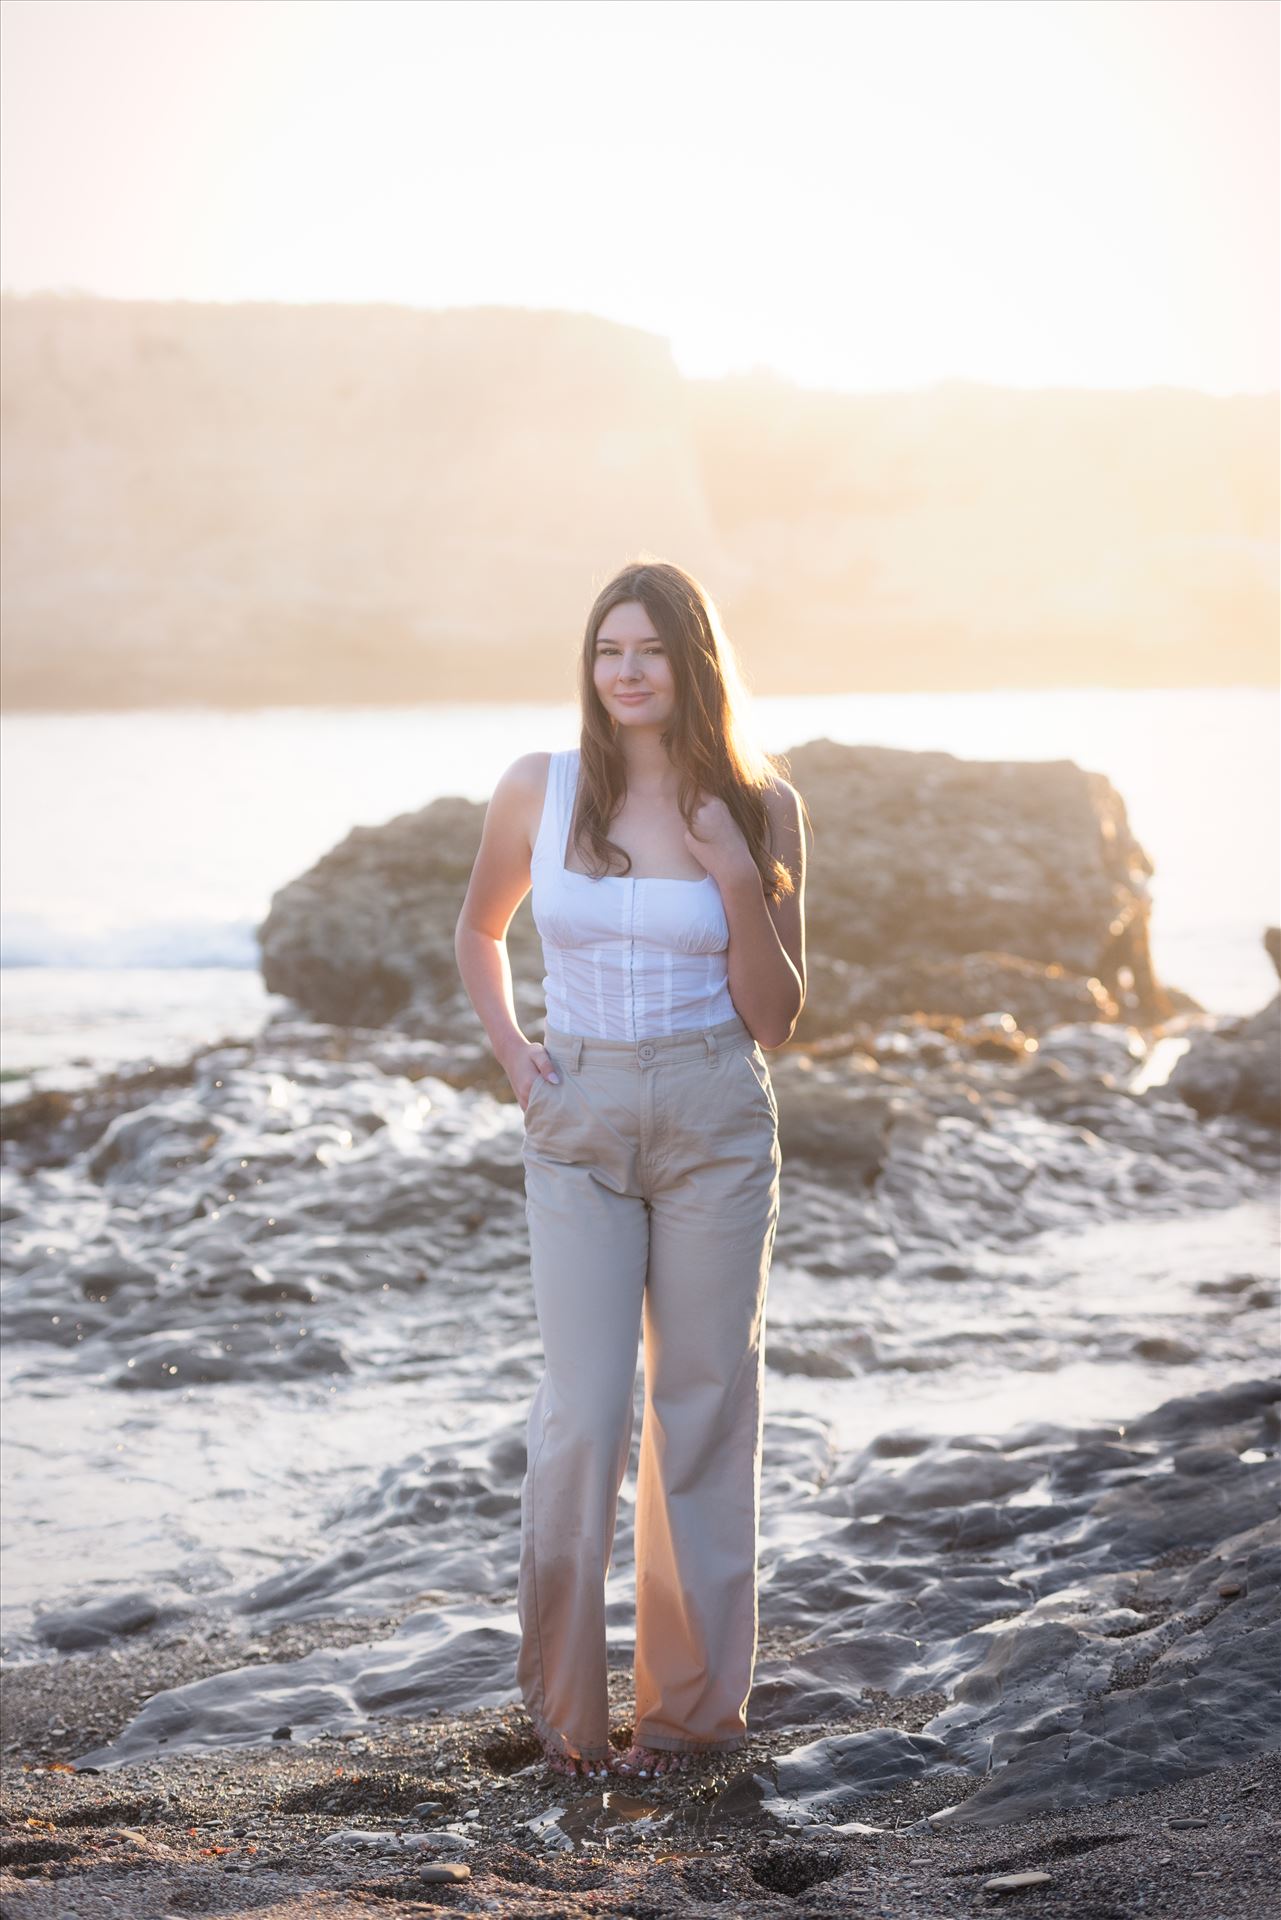 Final-9086.JPG Mirror's Edge Photography a San Luis Obispo Luxury Portrait, Wedding and Engagement Photographer capture Hayley's Senior Portrait Session at Montana de Oro.  Hayley sunflare with water. by Sarah Williams